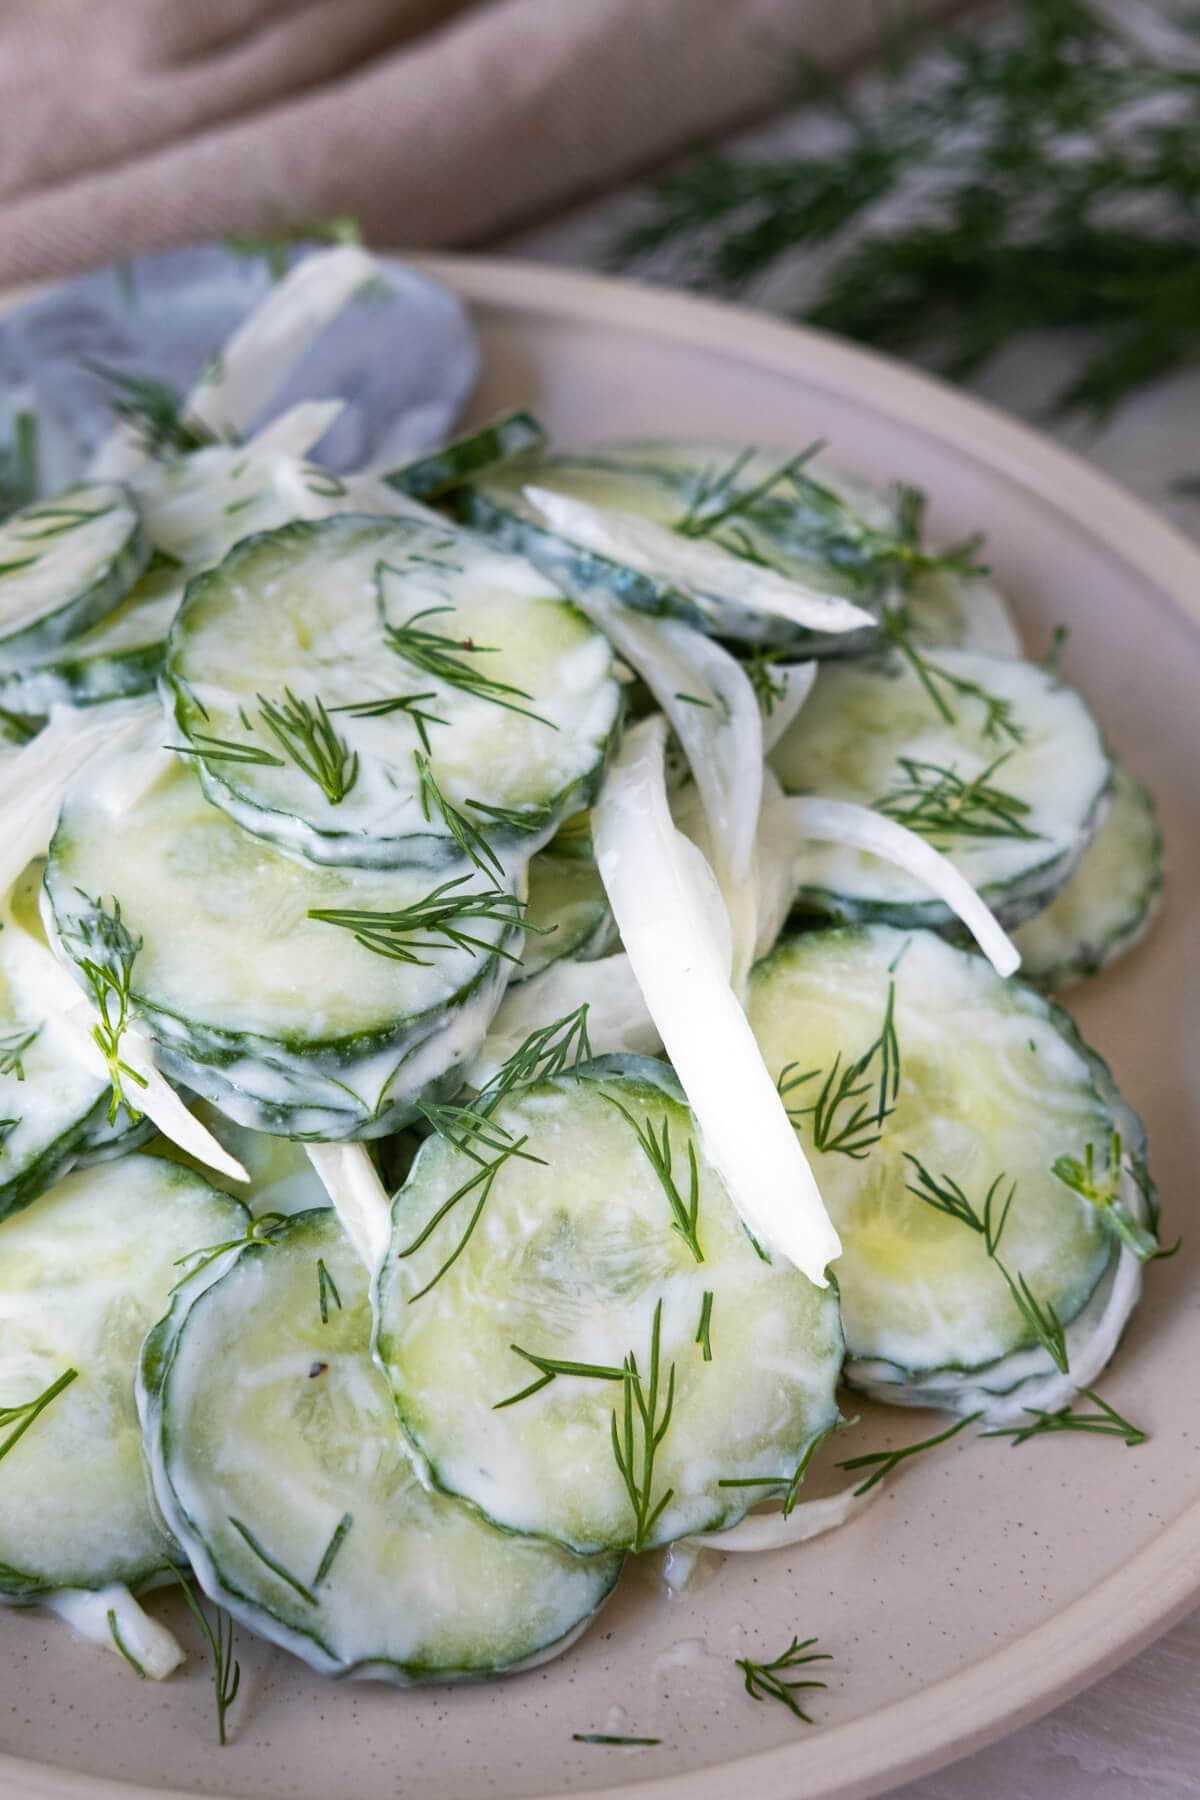 Slices of cucumbers dressed with Greek yogurt balsamic dressing served white onion slices and fresh chopped dill on top served in a pink plate.